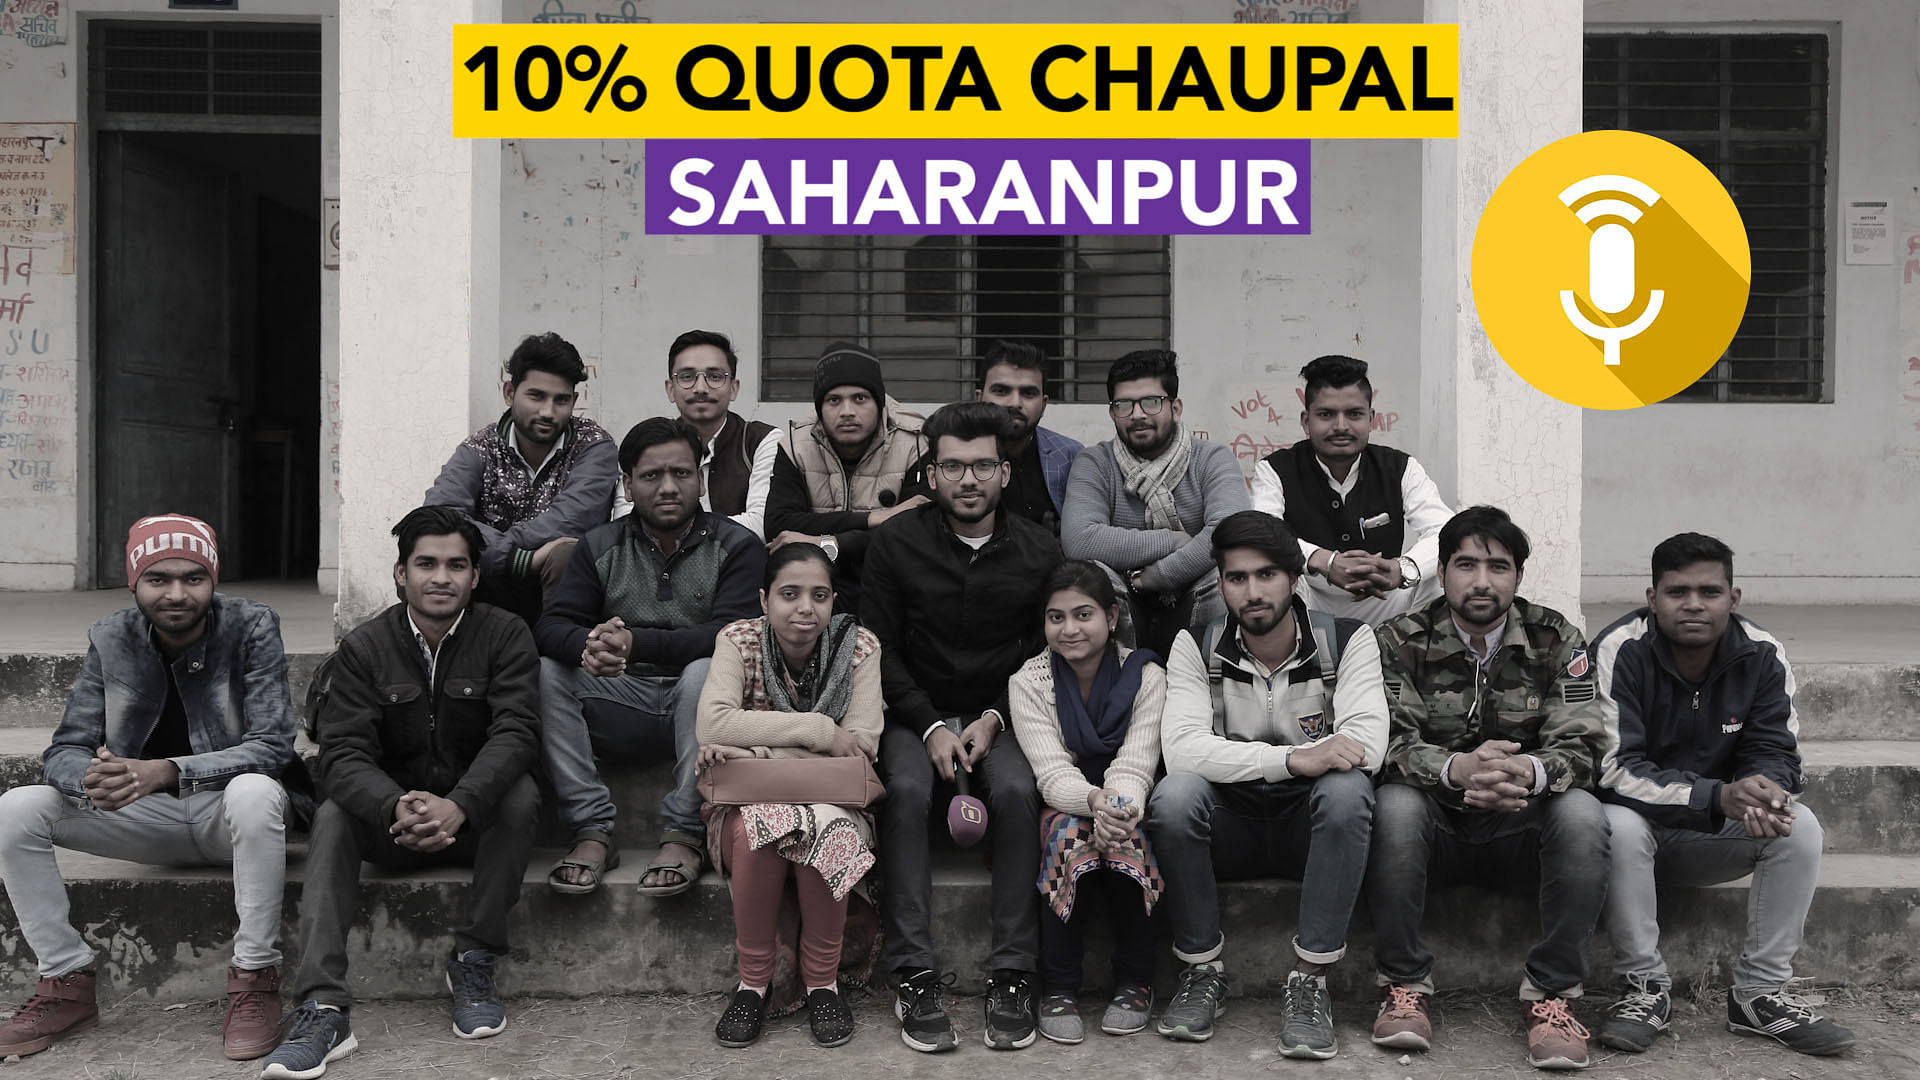 <b>The Quint</b> spoke to a some of students in Saharanpur, Uttar Pradesh, to sense the pulse of those who the 10% quota for EWS move directly impacts.